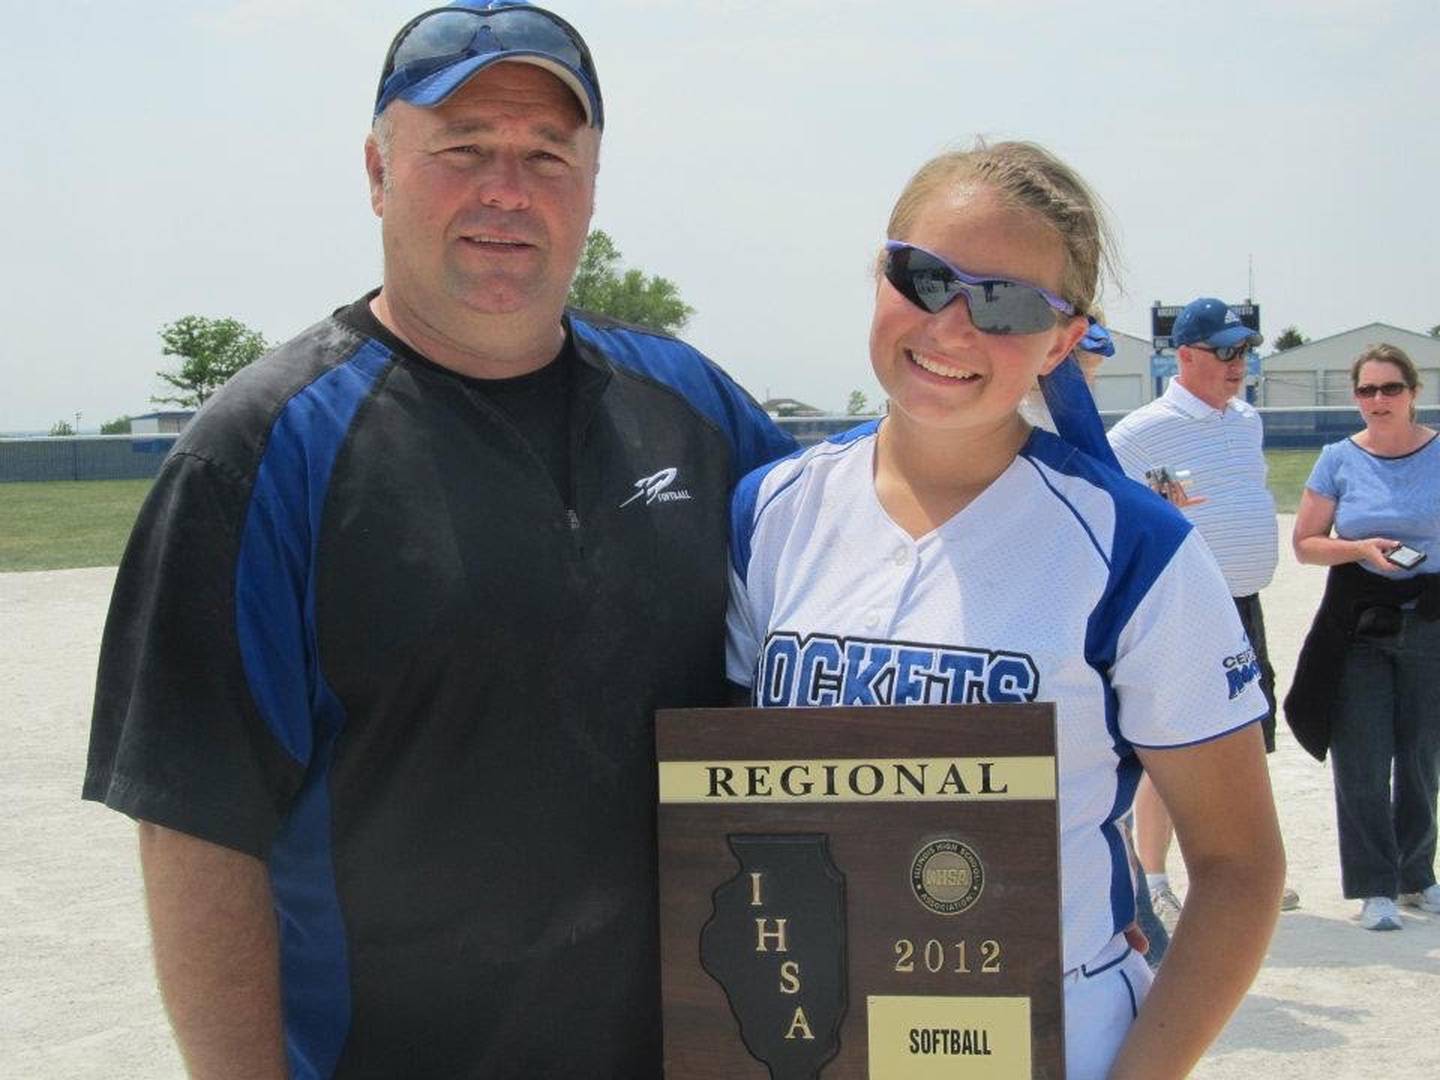 Bill Morrow poses with his daughter Angela after winning a Class 3A regional championship with Burlington Central in 2012. Murrow, who previously served as a volunteer assistant with the Rockets, was named Central's coach earlier this month.